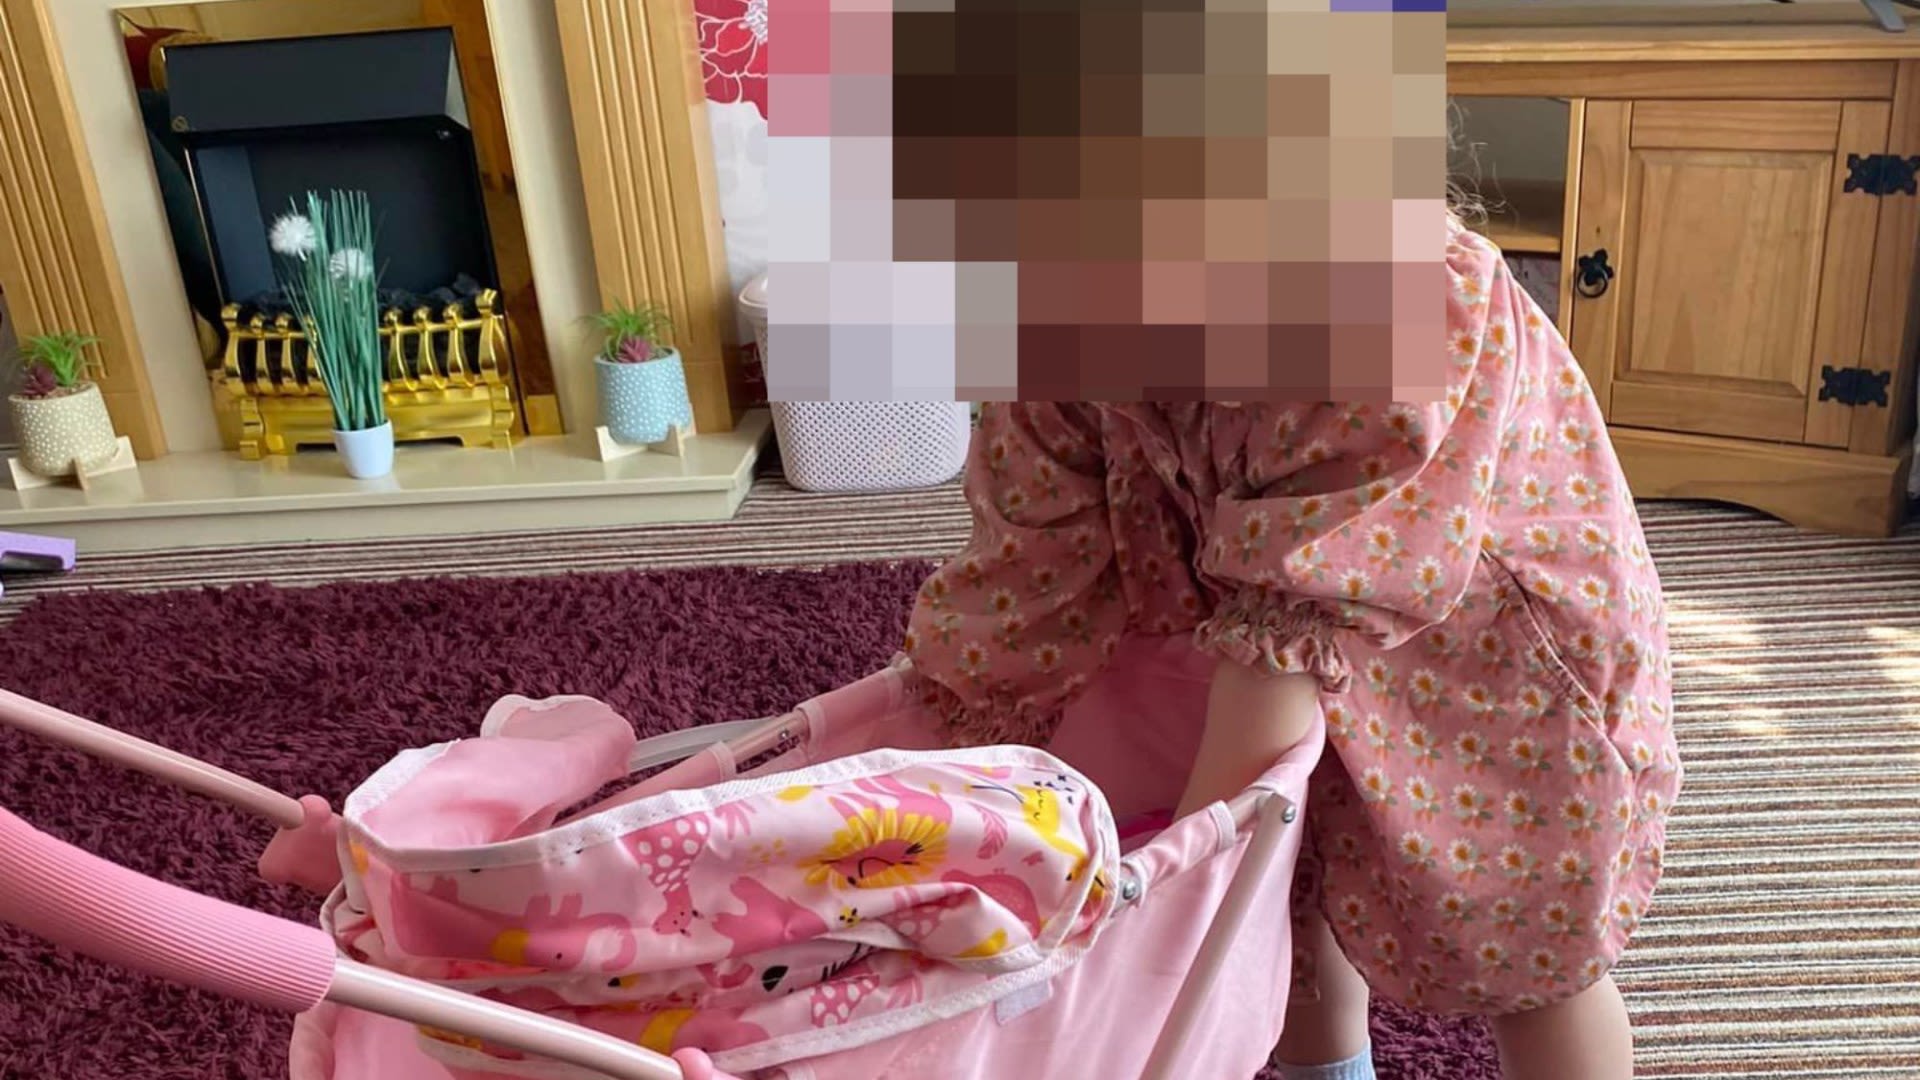 'I bought that for £30' parents yell as Poundland flogs PRAMS for just £2